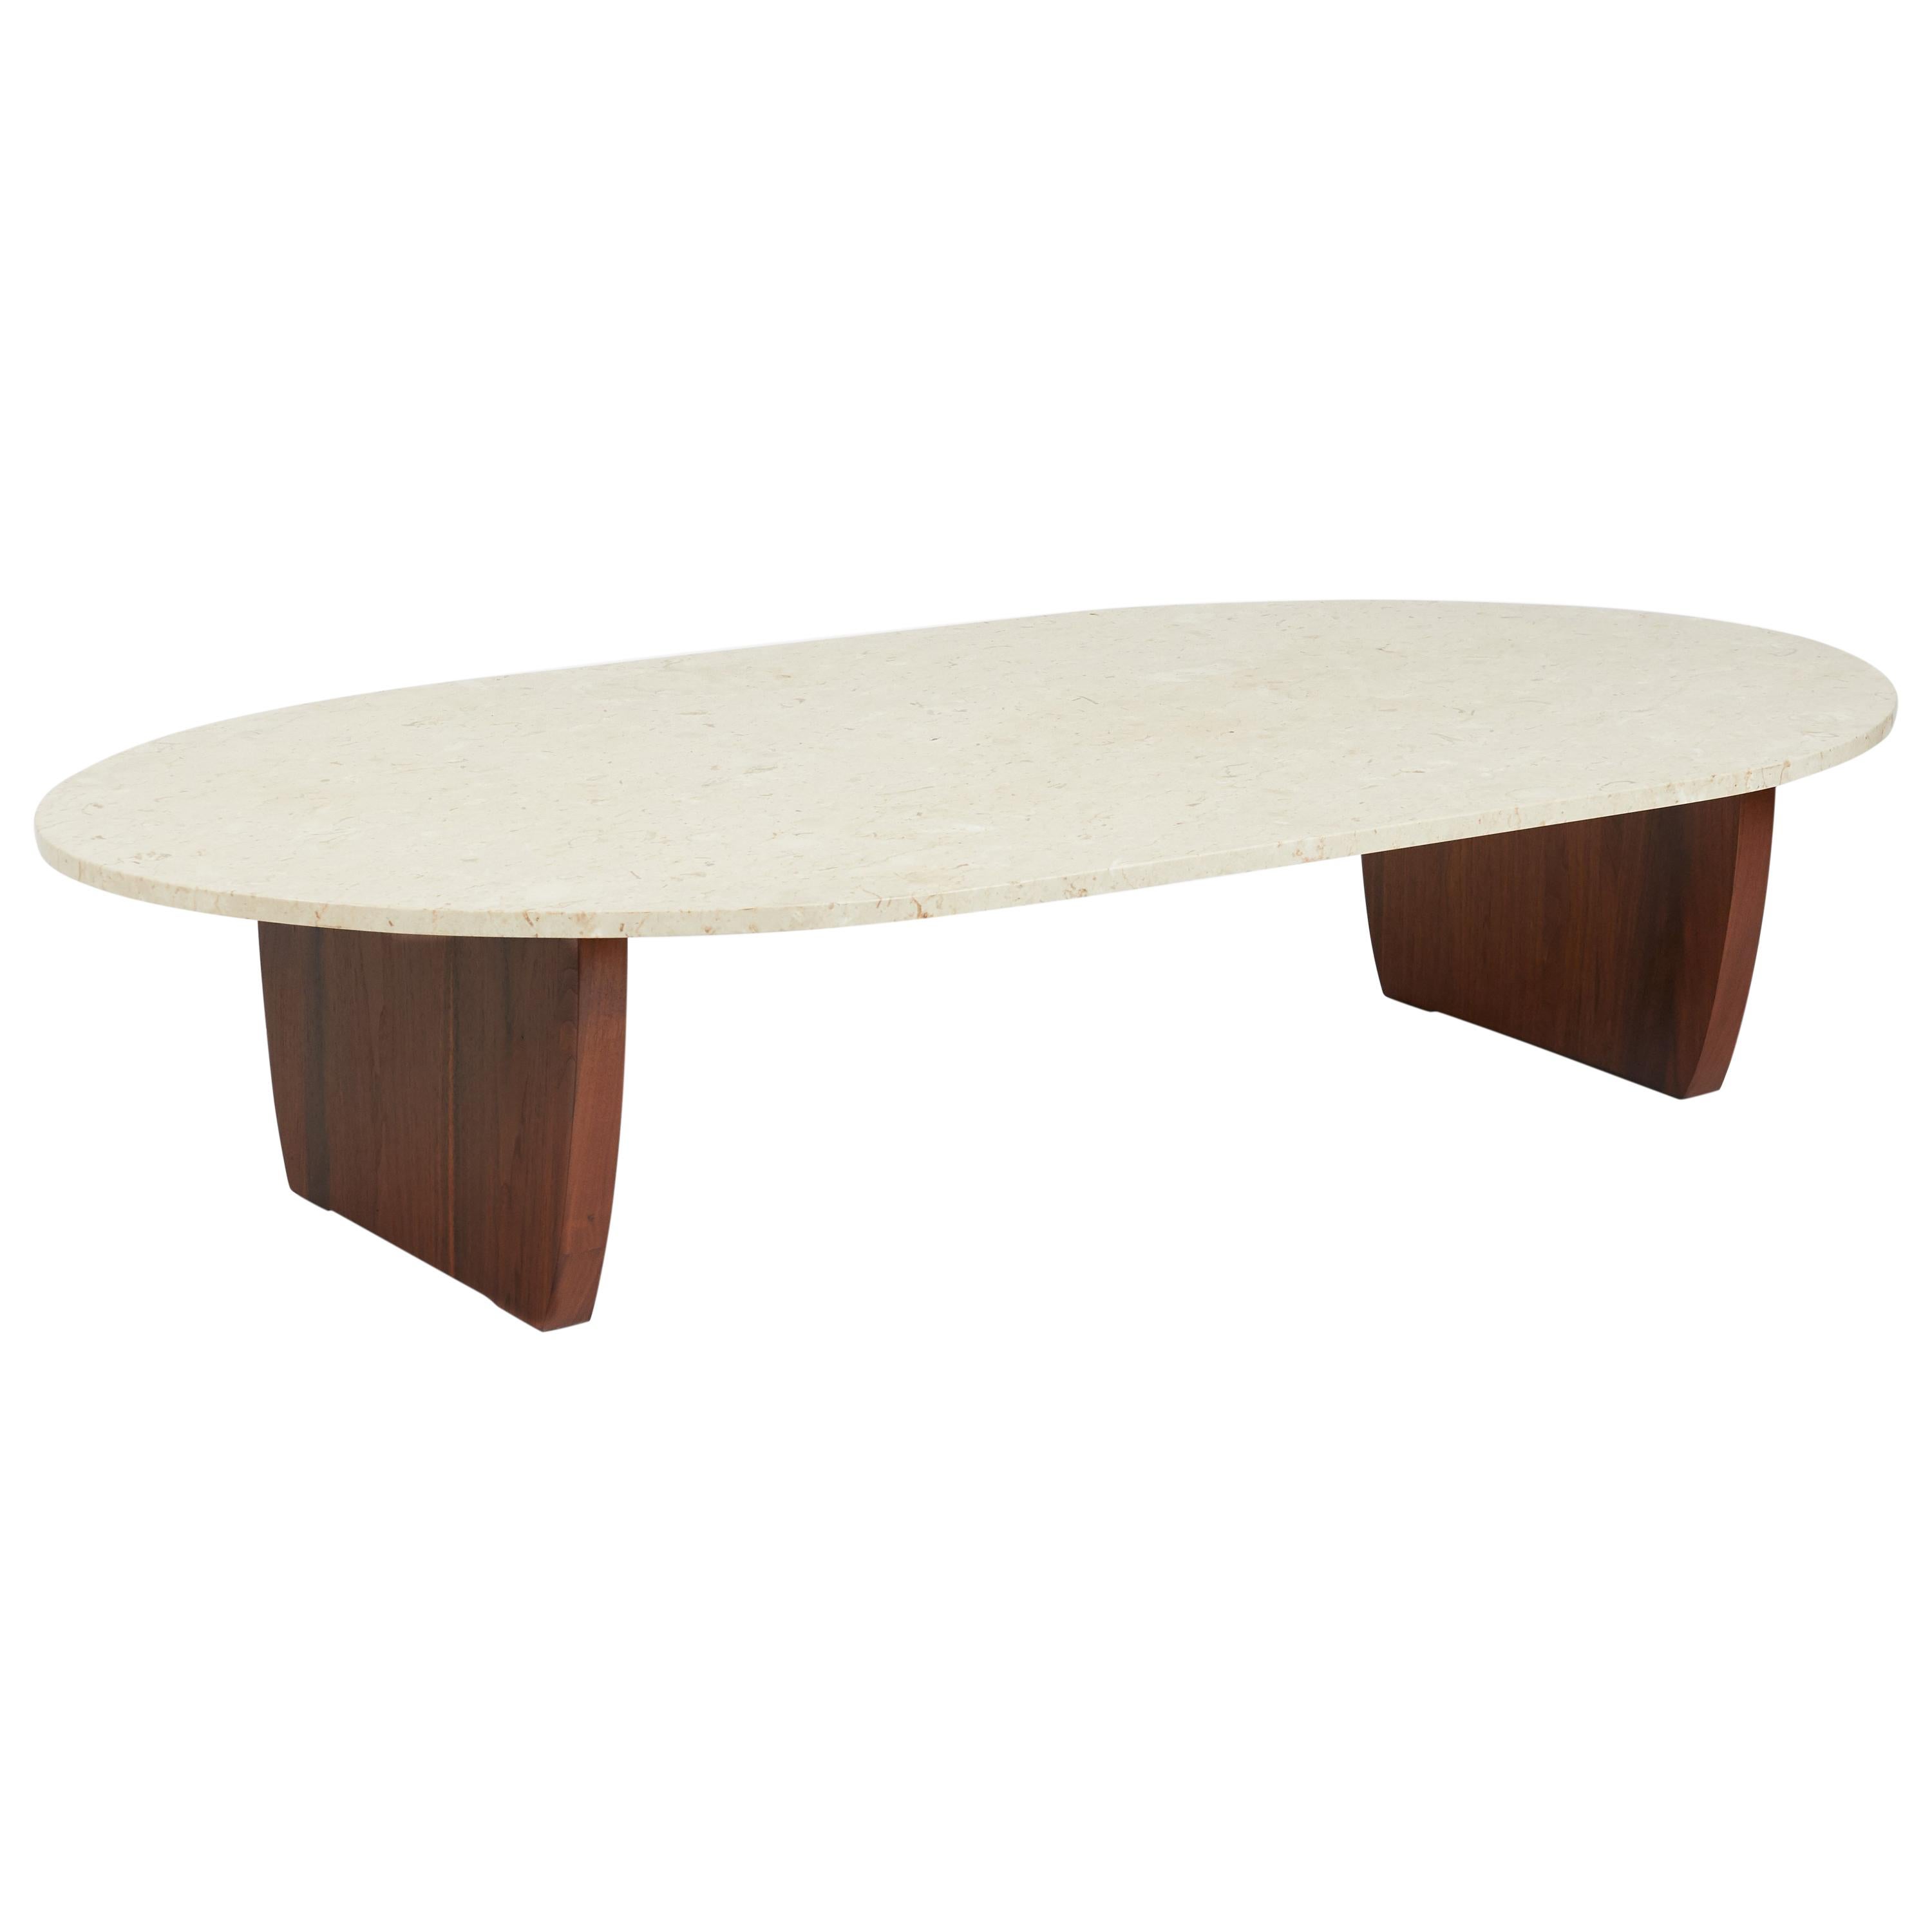 Stacked Walnut and Travertine Coffee Table by American Craftsman